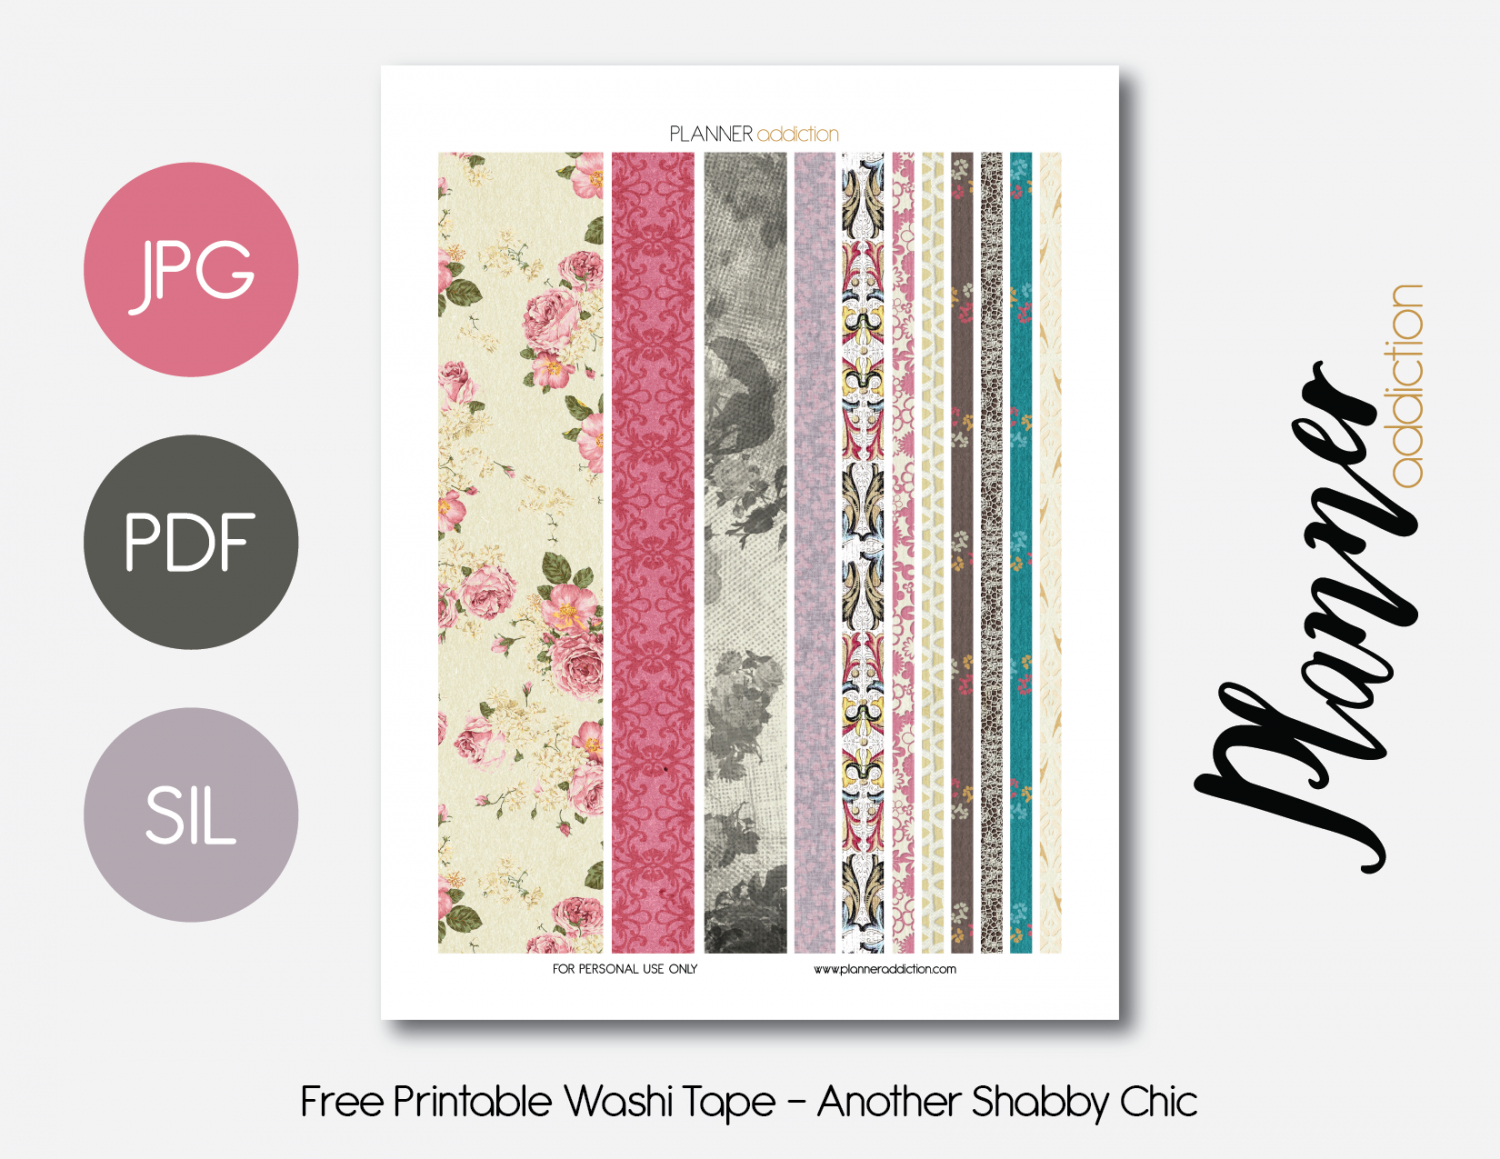 Free Printable Washi Tape - Another Shabby Chic | Organization - Free Printable Washi Tape